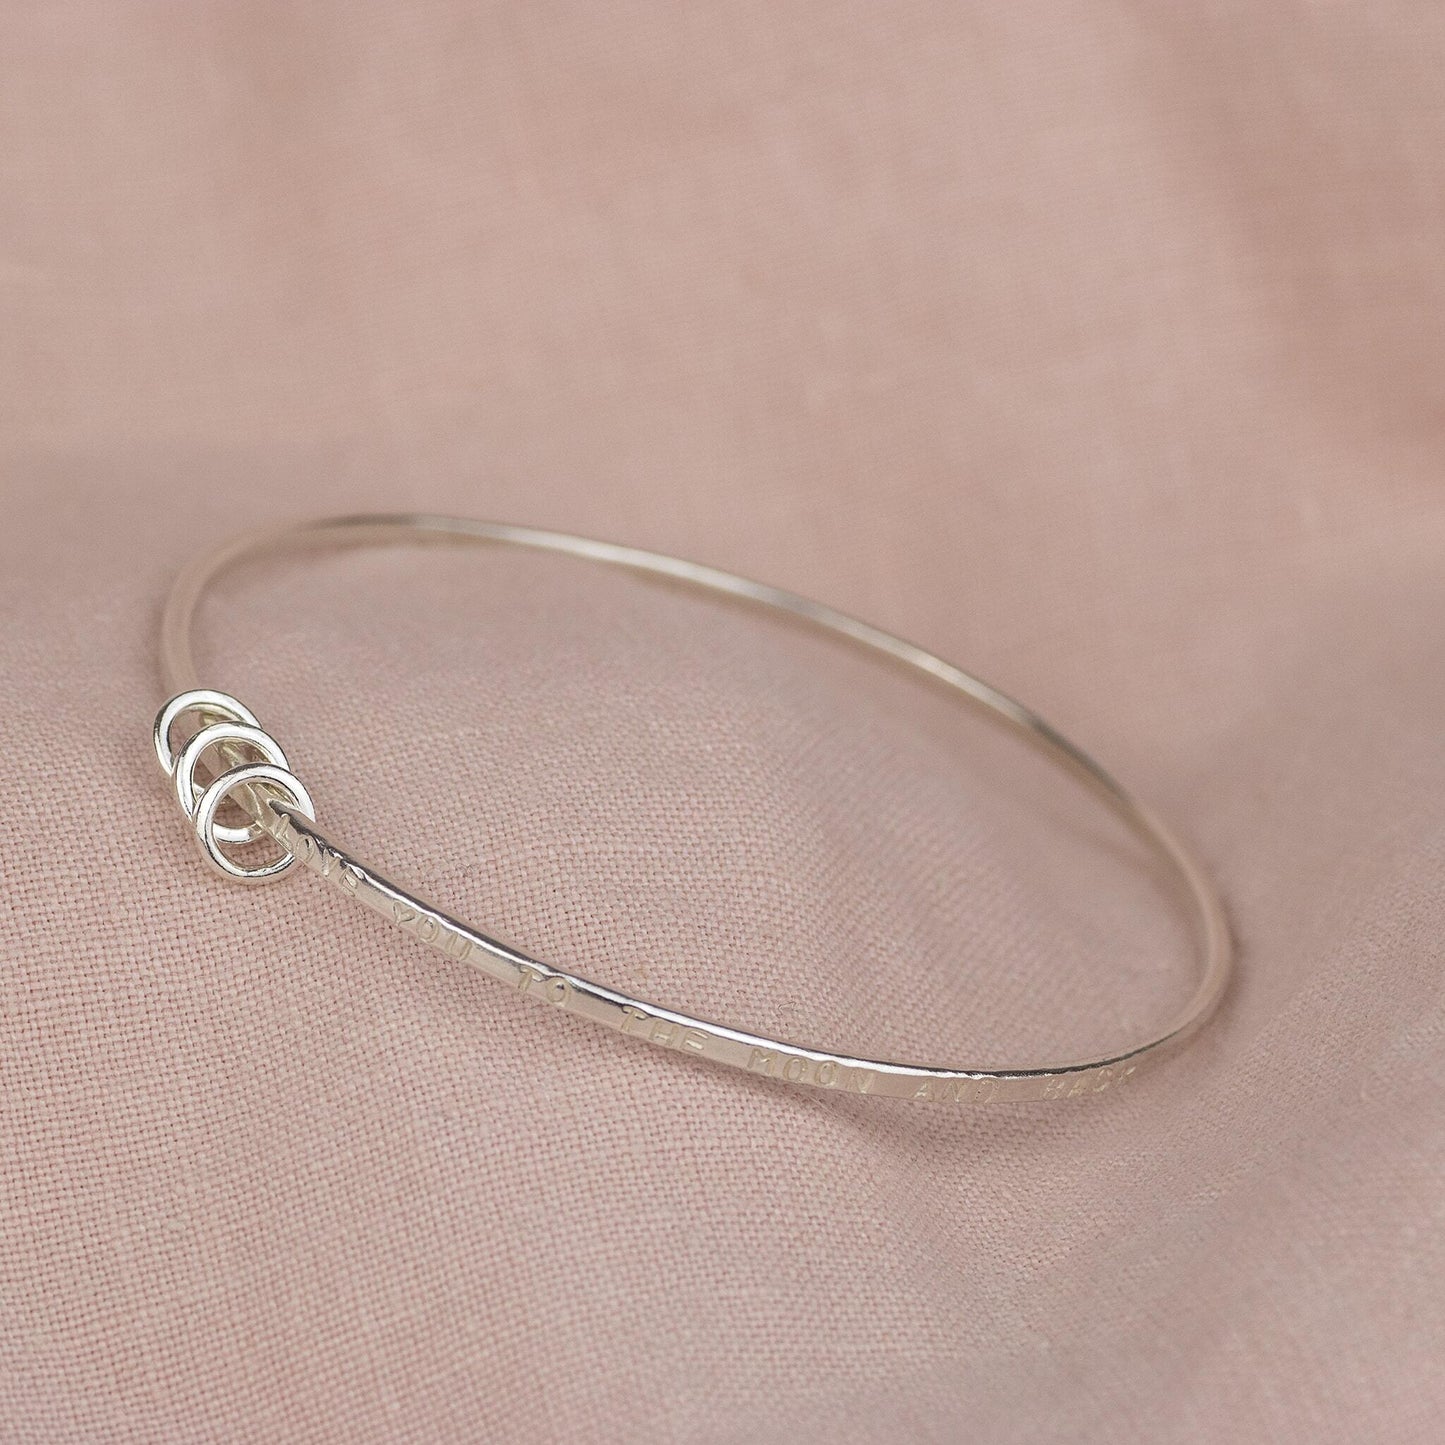 Personalised Family Links Bangle - 3 Links for 3 Loved Ones